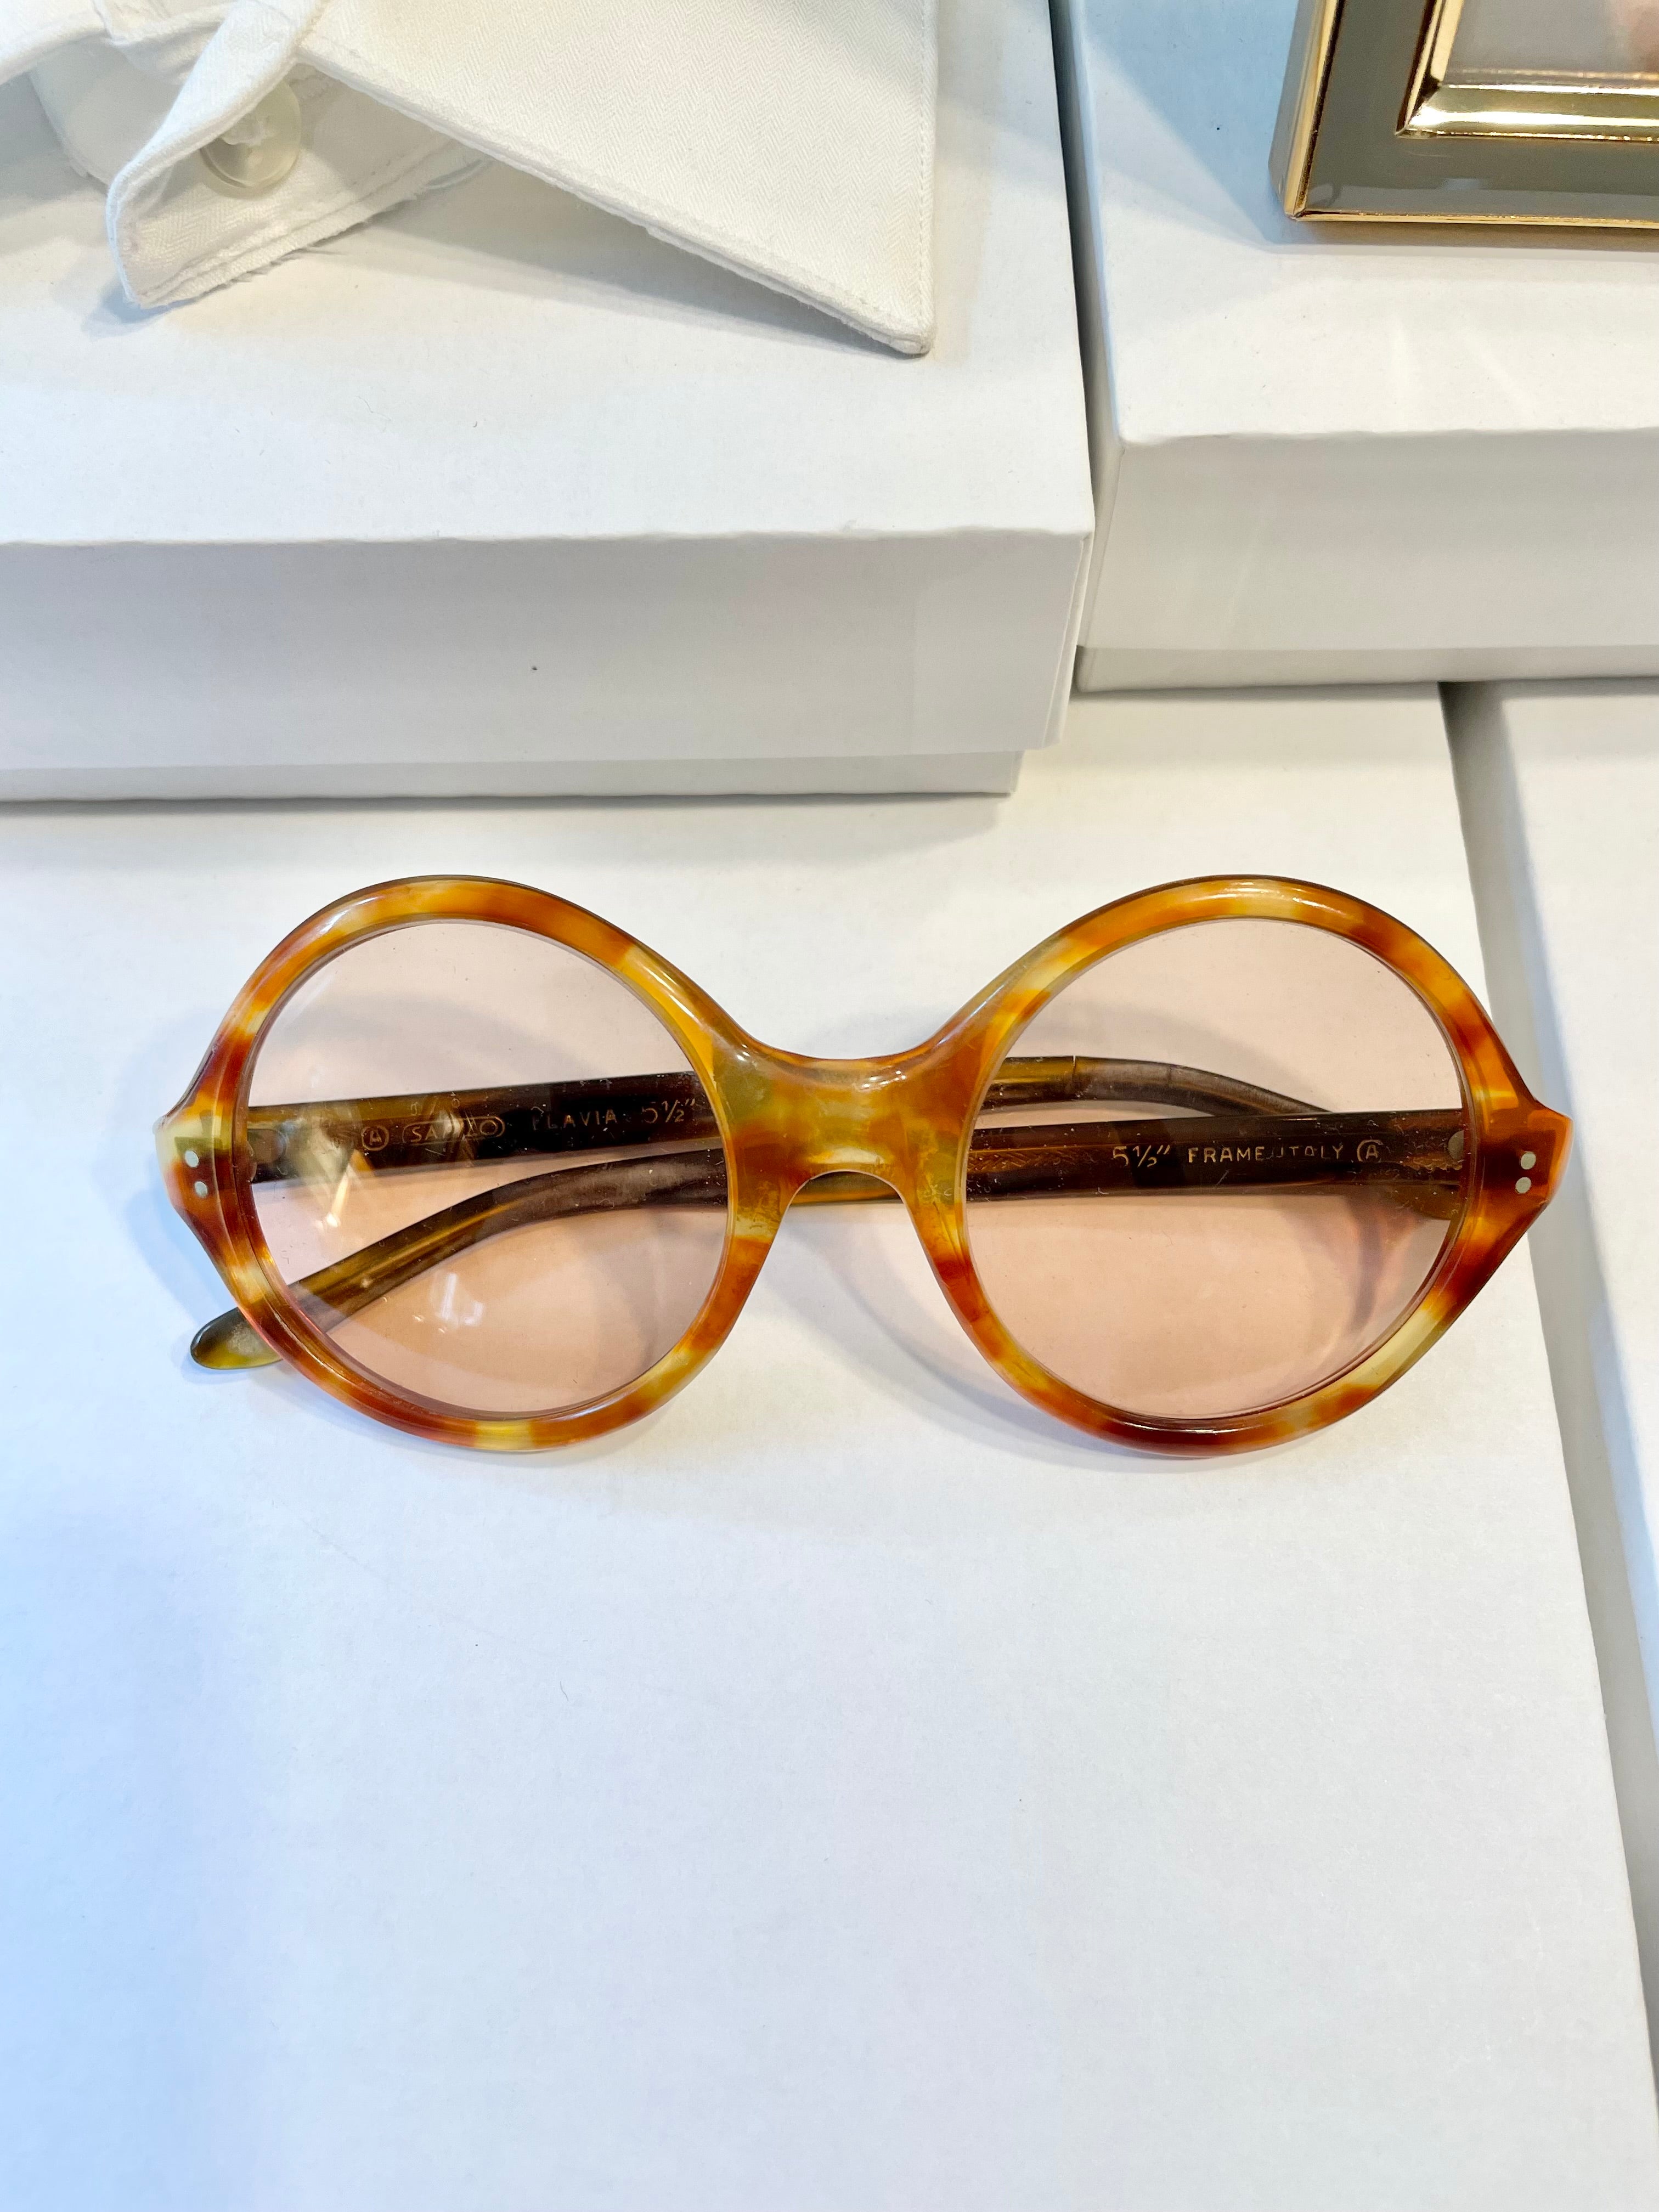 The Preppy Girl Society loves a classy pair of sunnies... These tortoise round sunglasses are a 1950's gem! Made in France